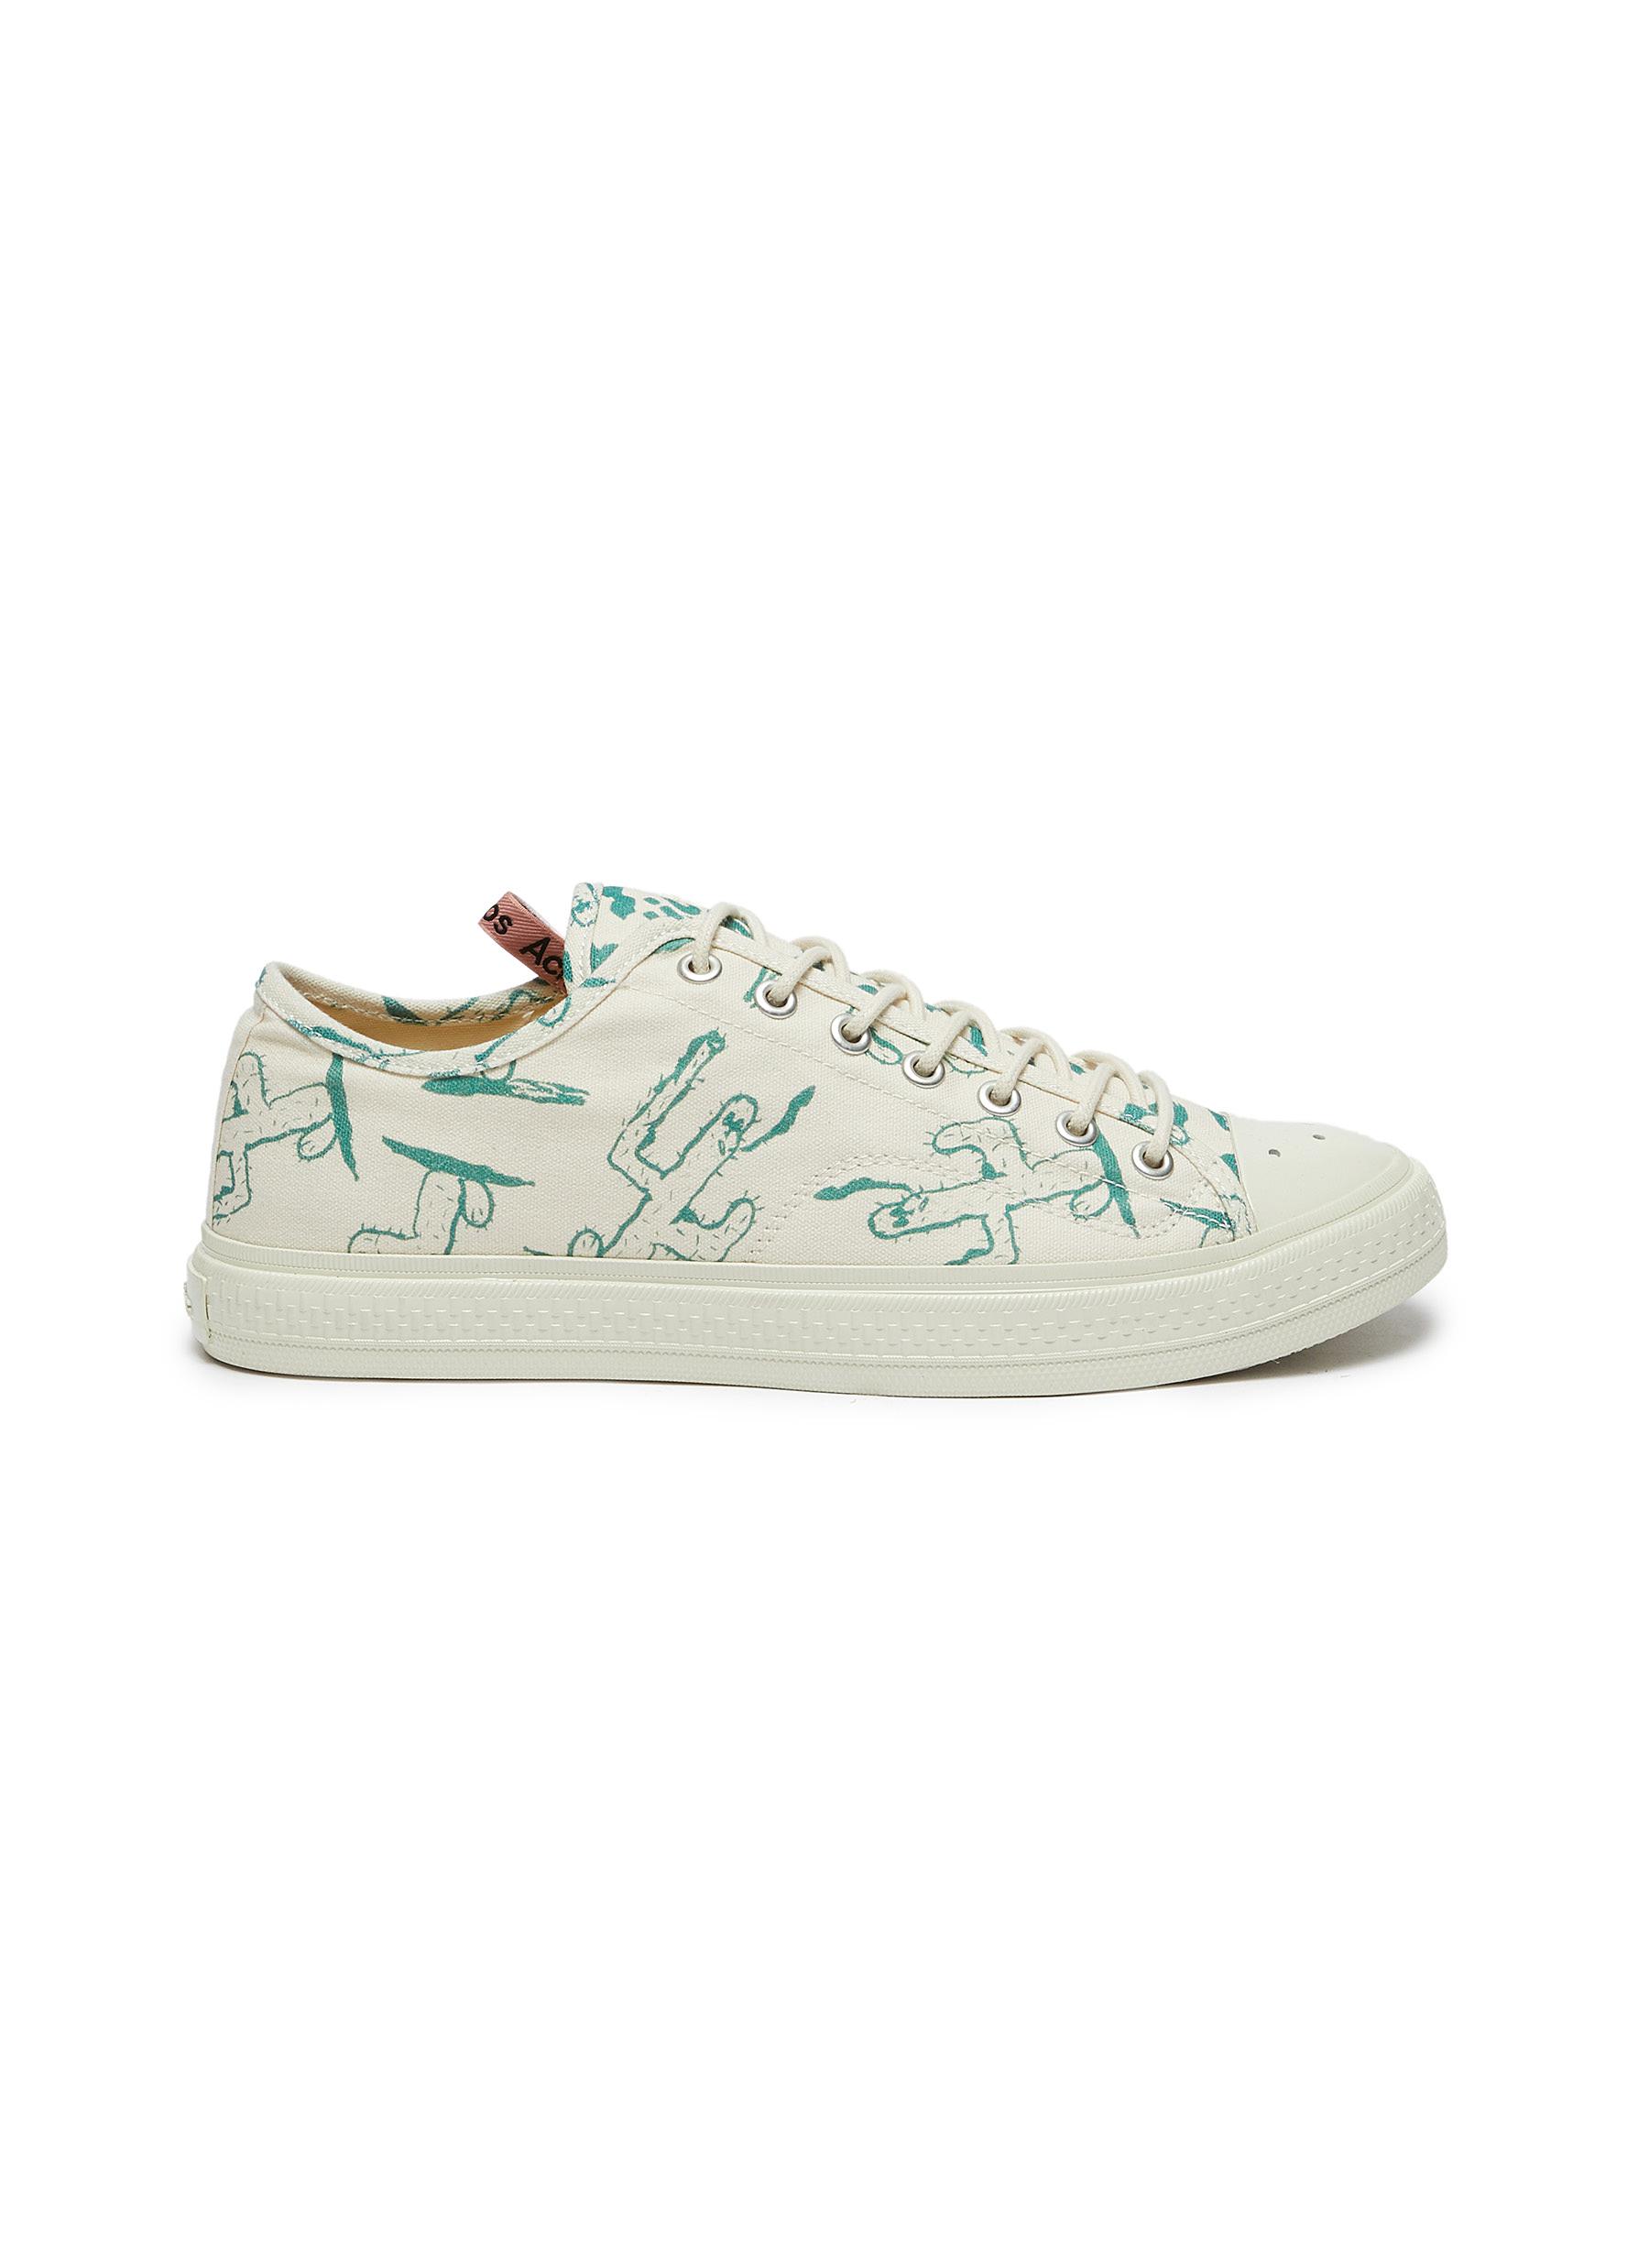 Cactus Print Lace Up Canvas Sneakers